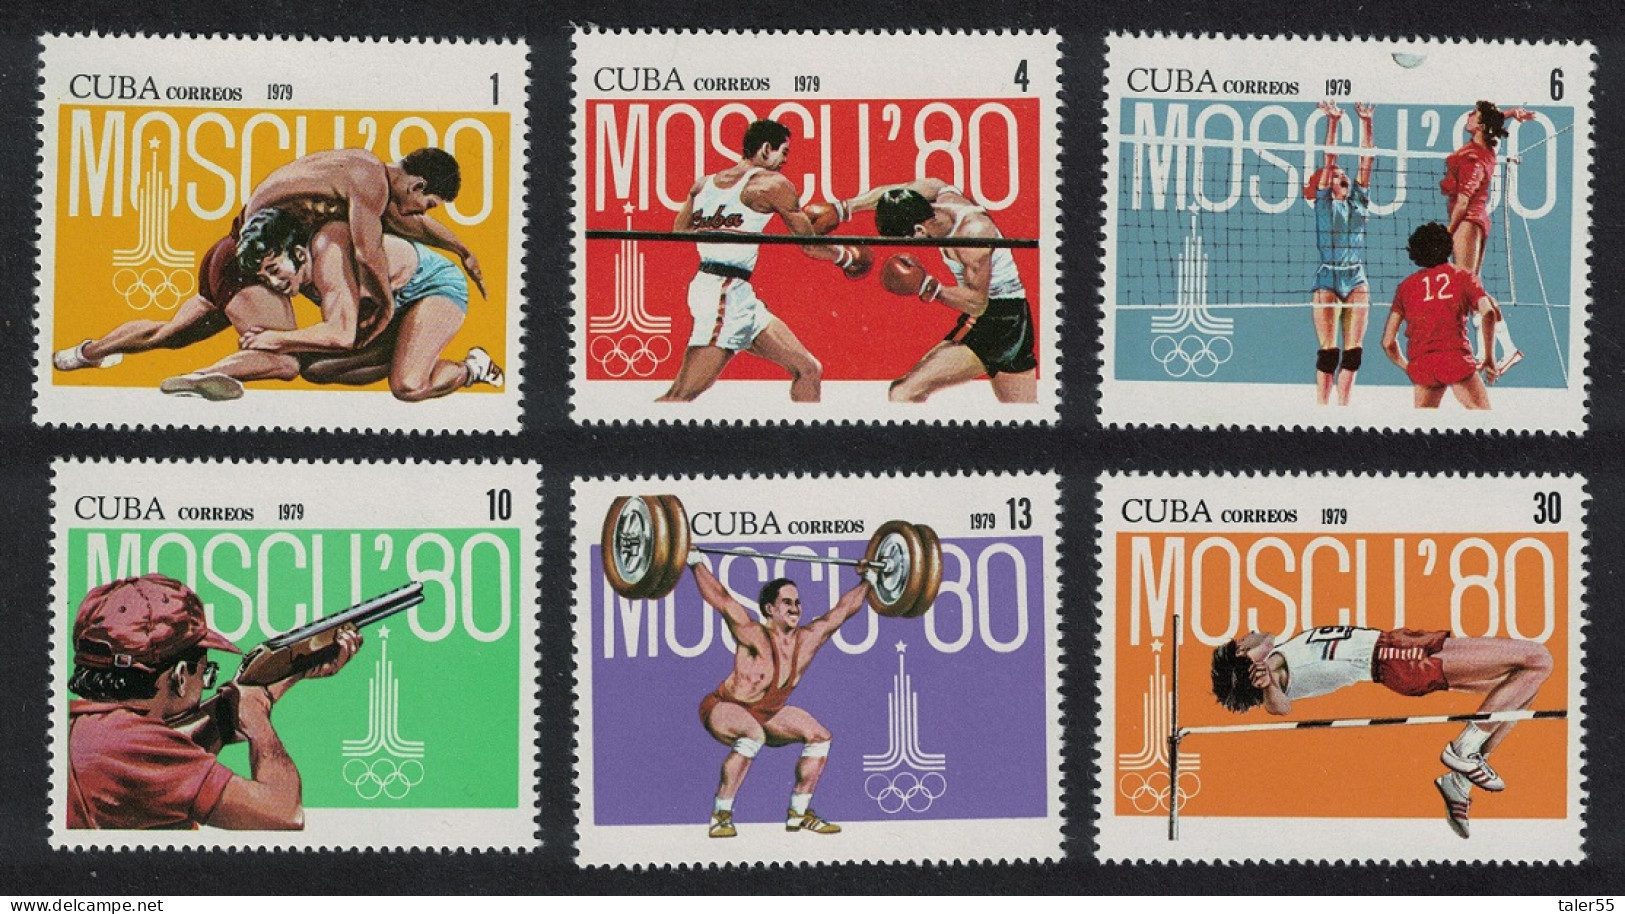 Caribic Pre-Olympics Moscow 1980 6v 1979 MNH SG#2570-2575 - Unused Stamps